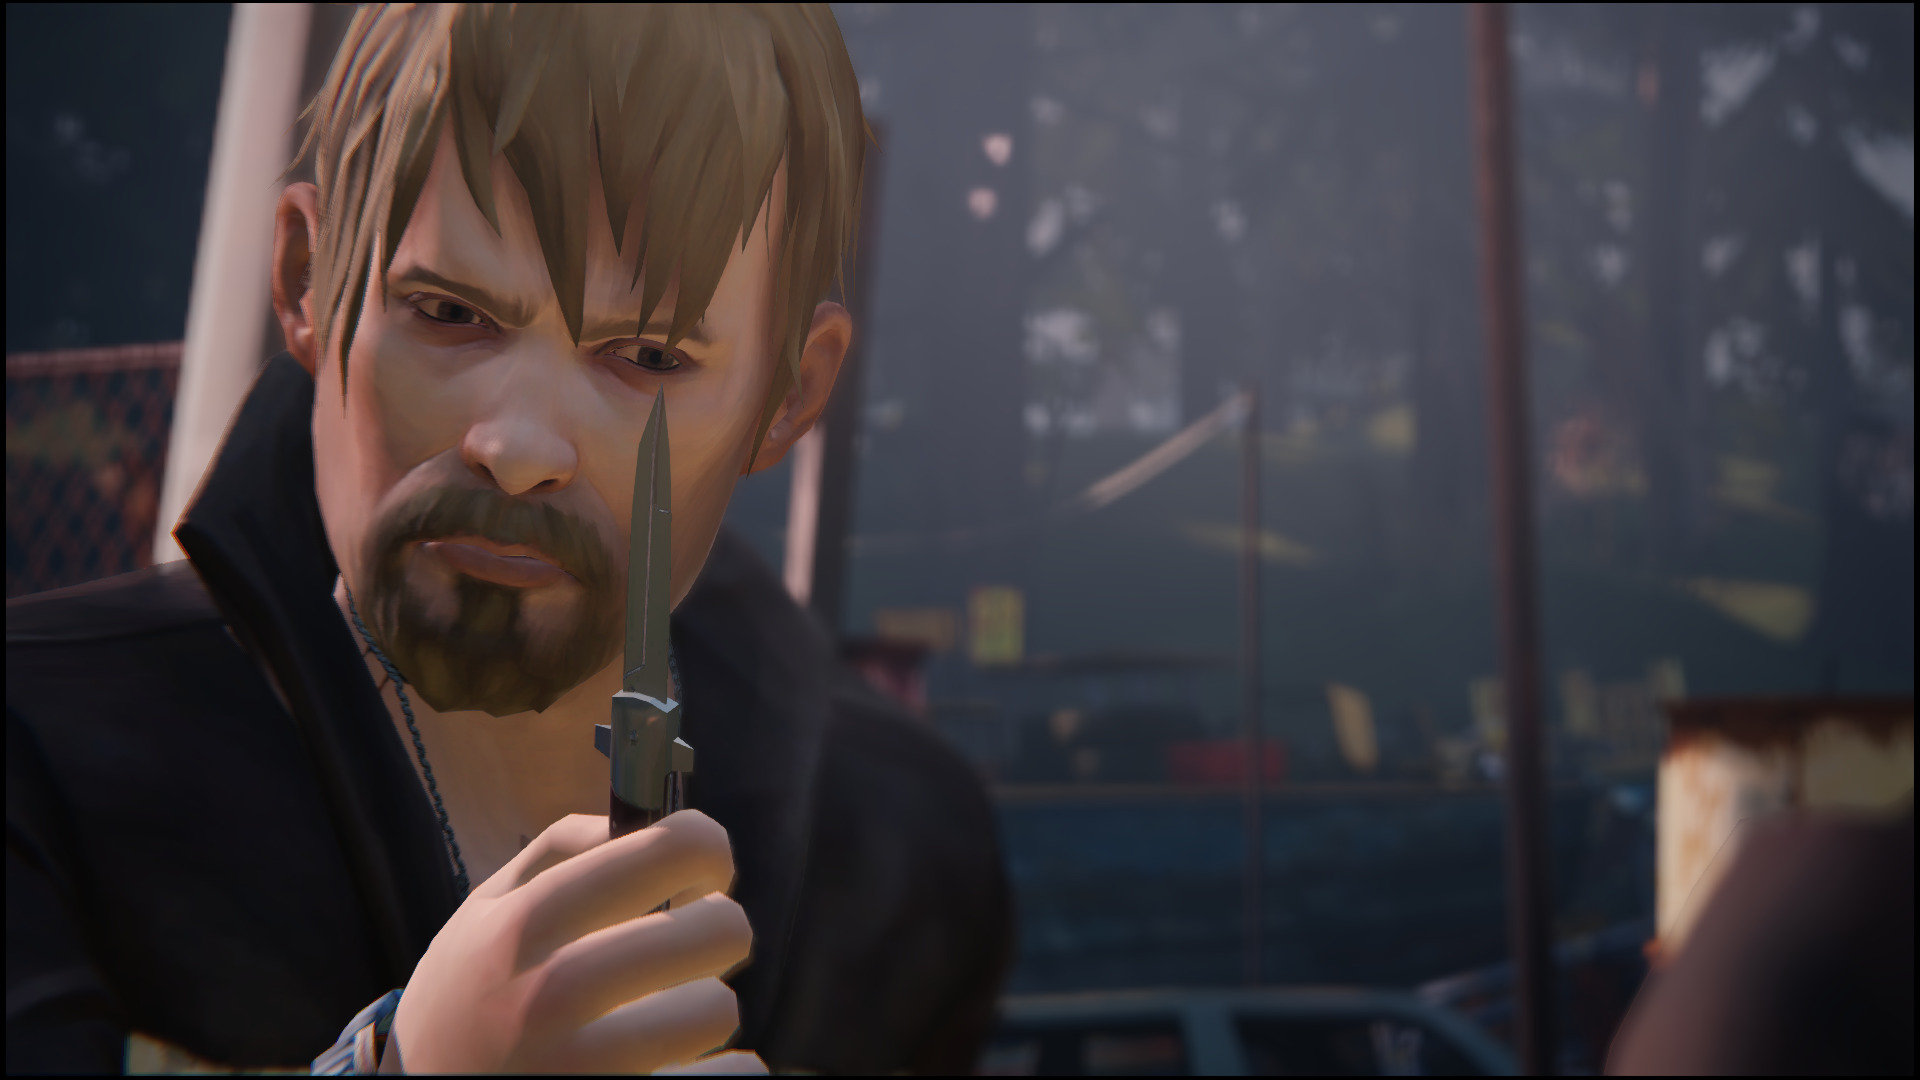 life is strange characters we've love to see return, frank bowers